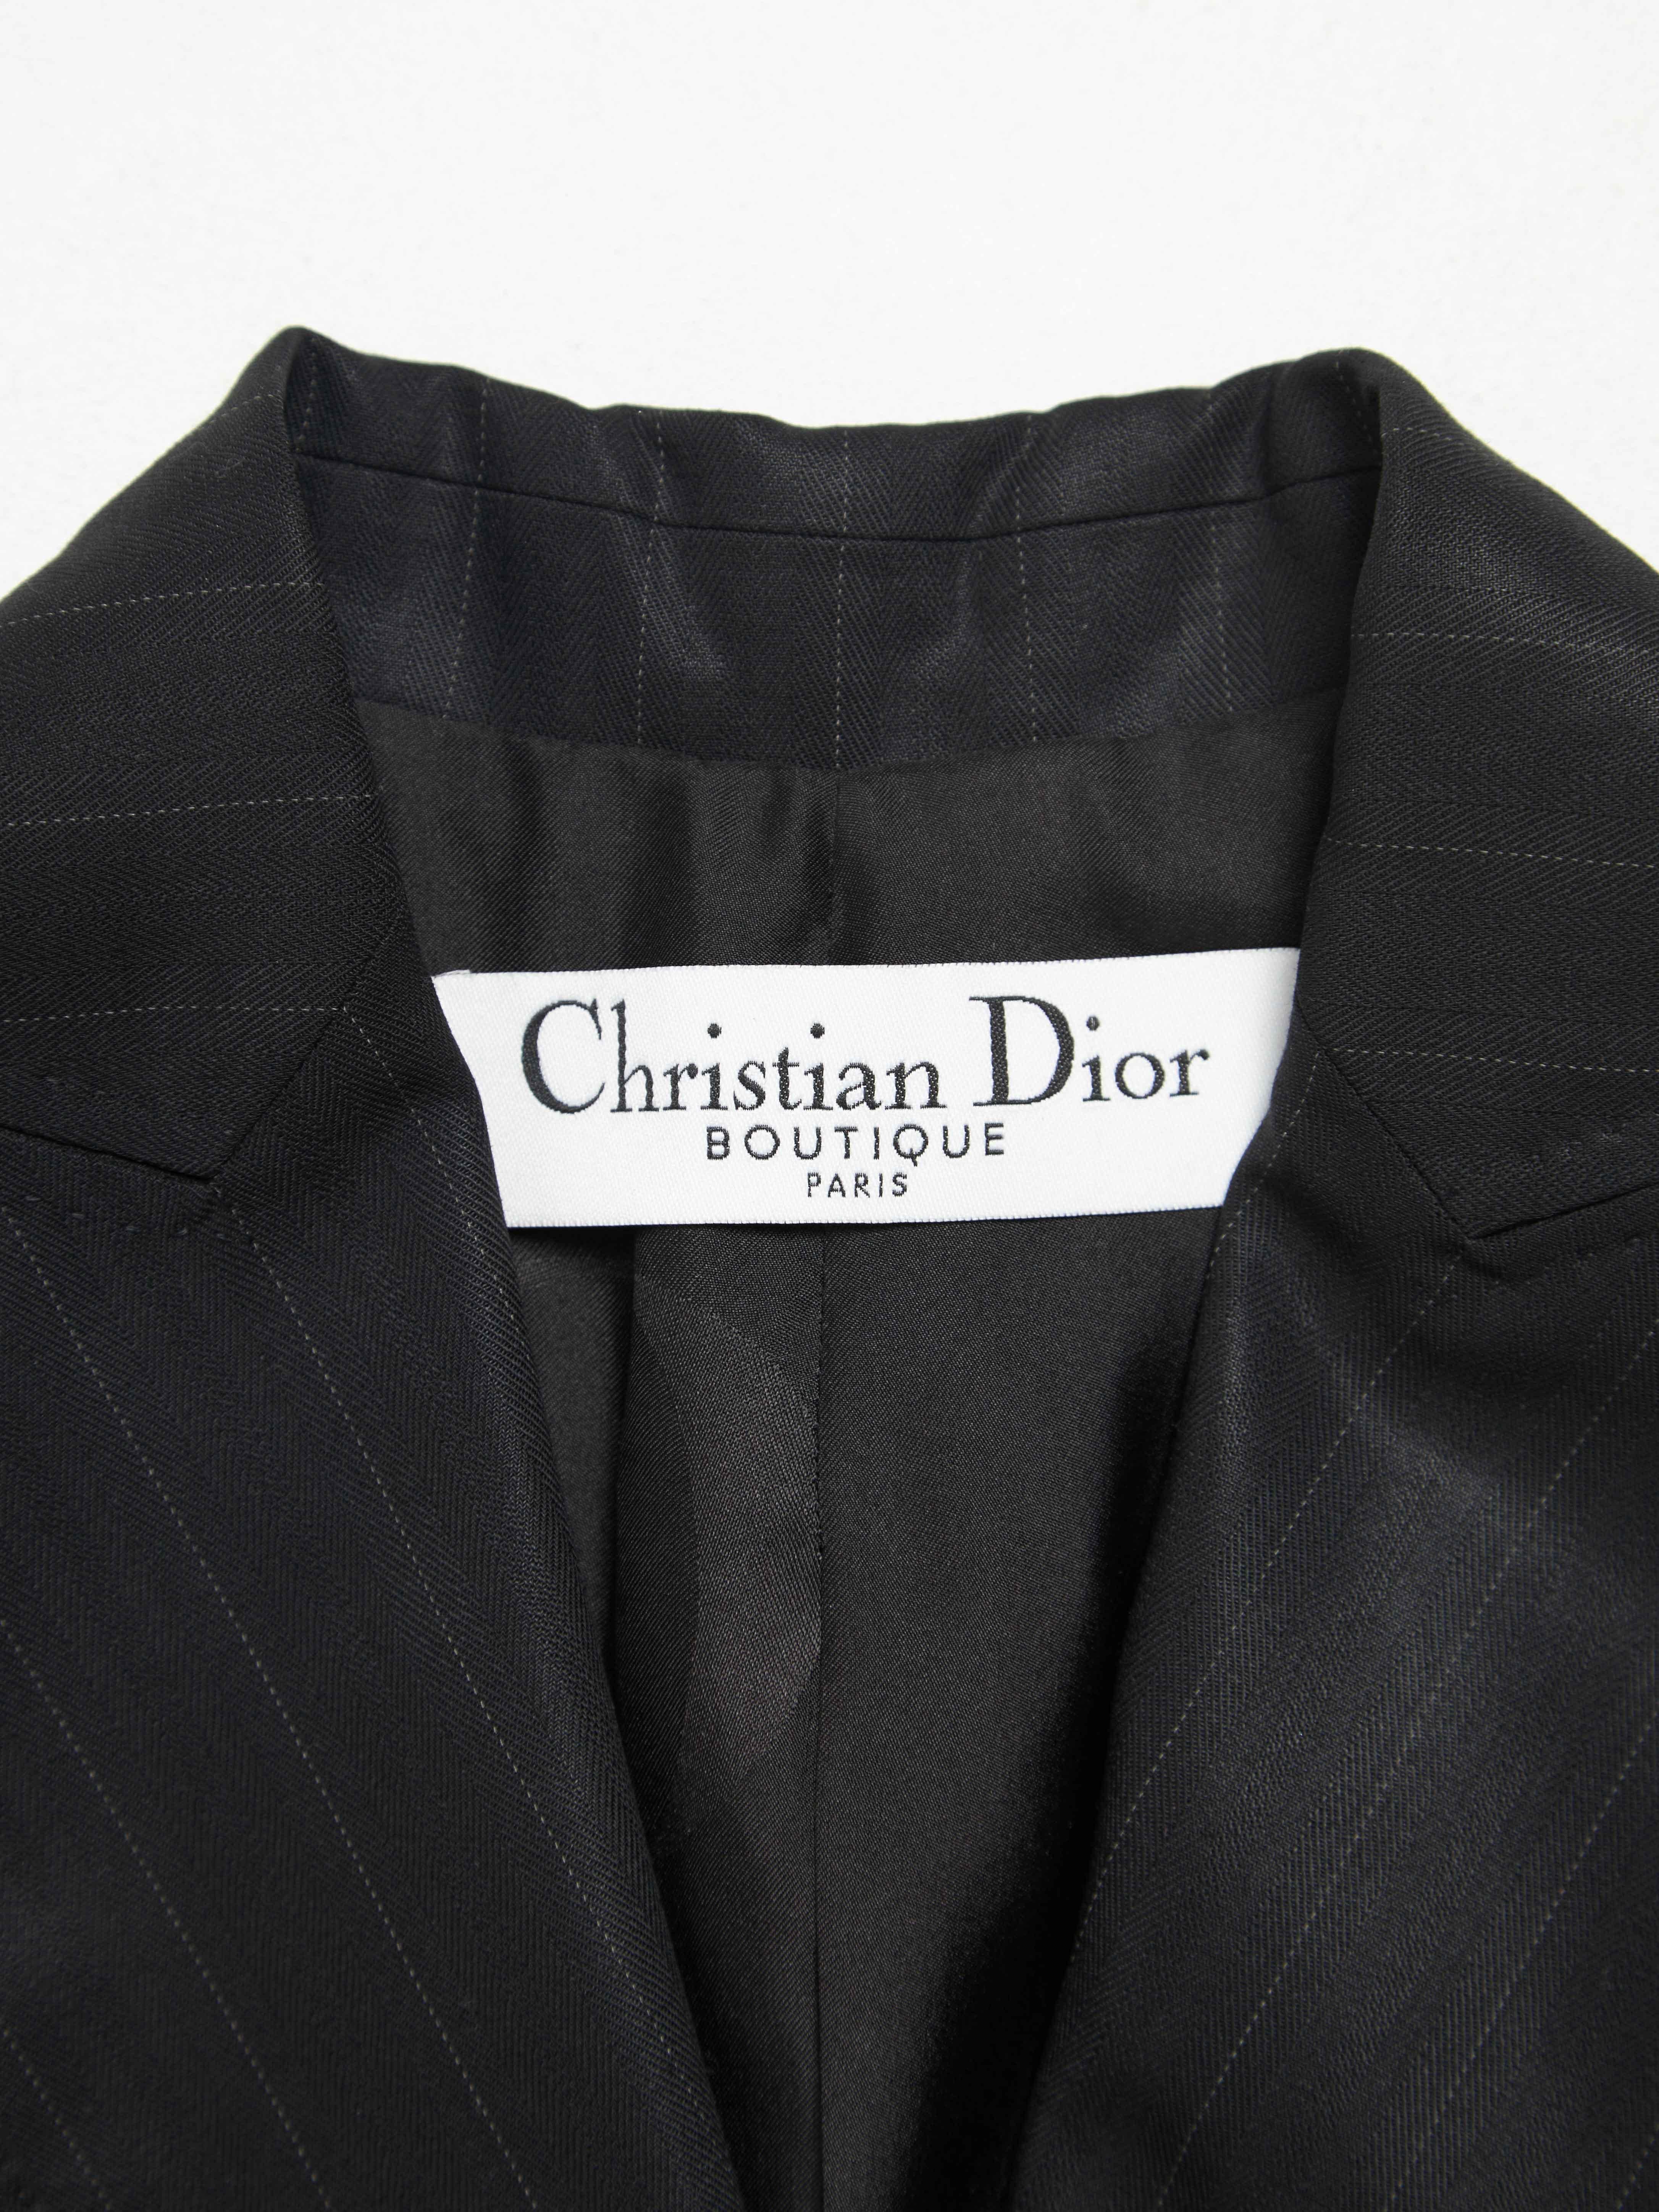 Dior Christian Dior Dark Gray Wool And Silk Blazer Jacket In New Condition For Sale In Dover, DE